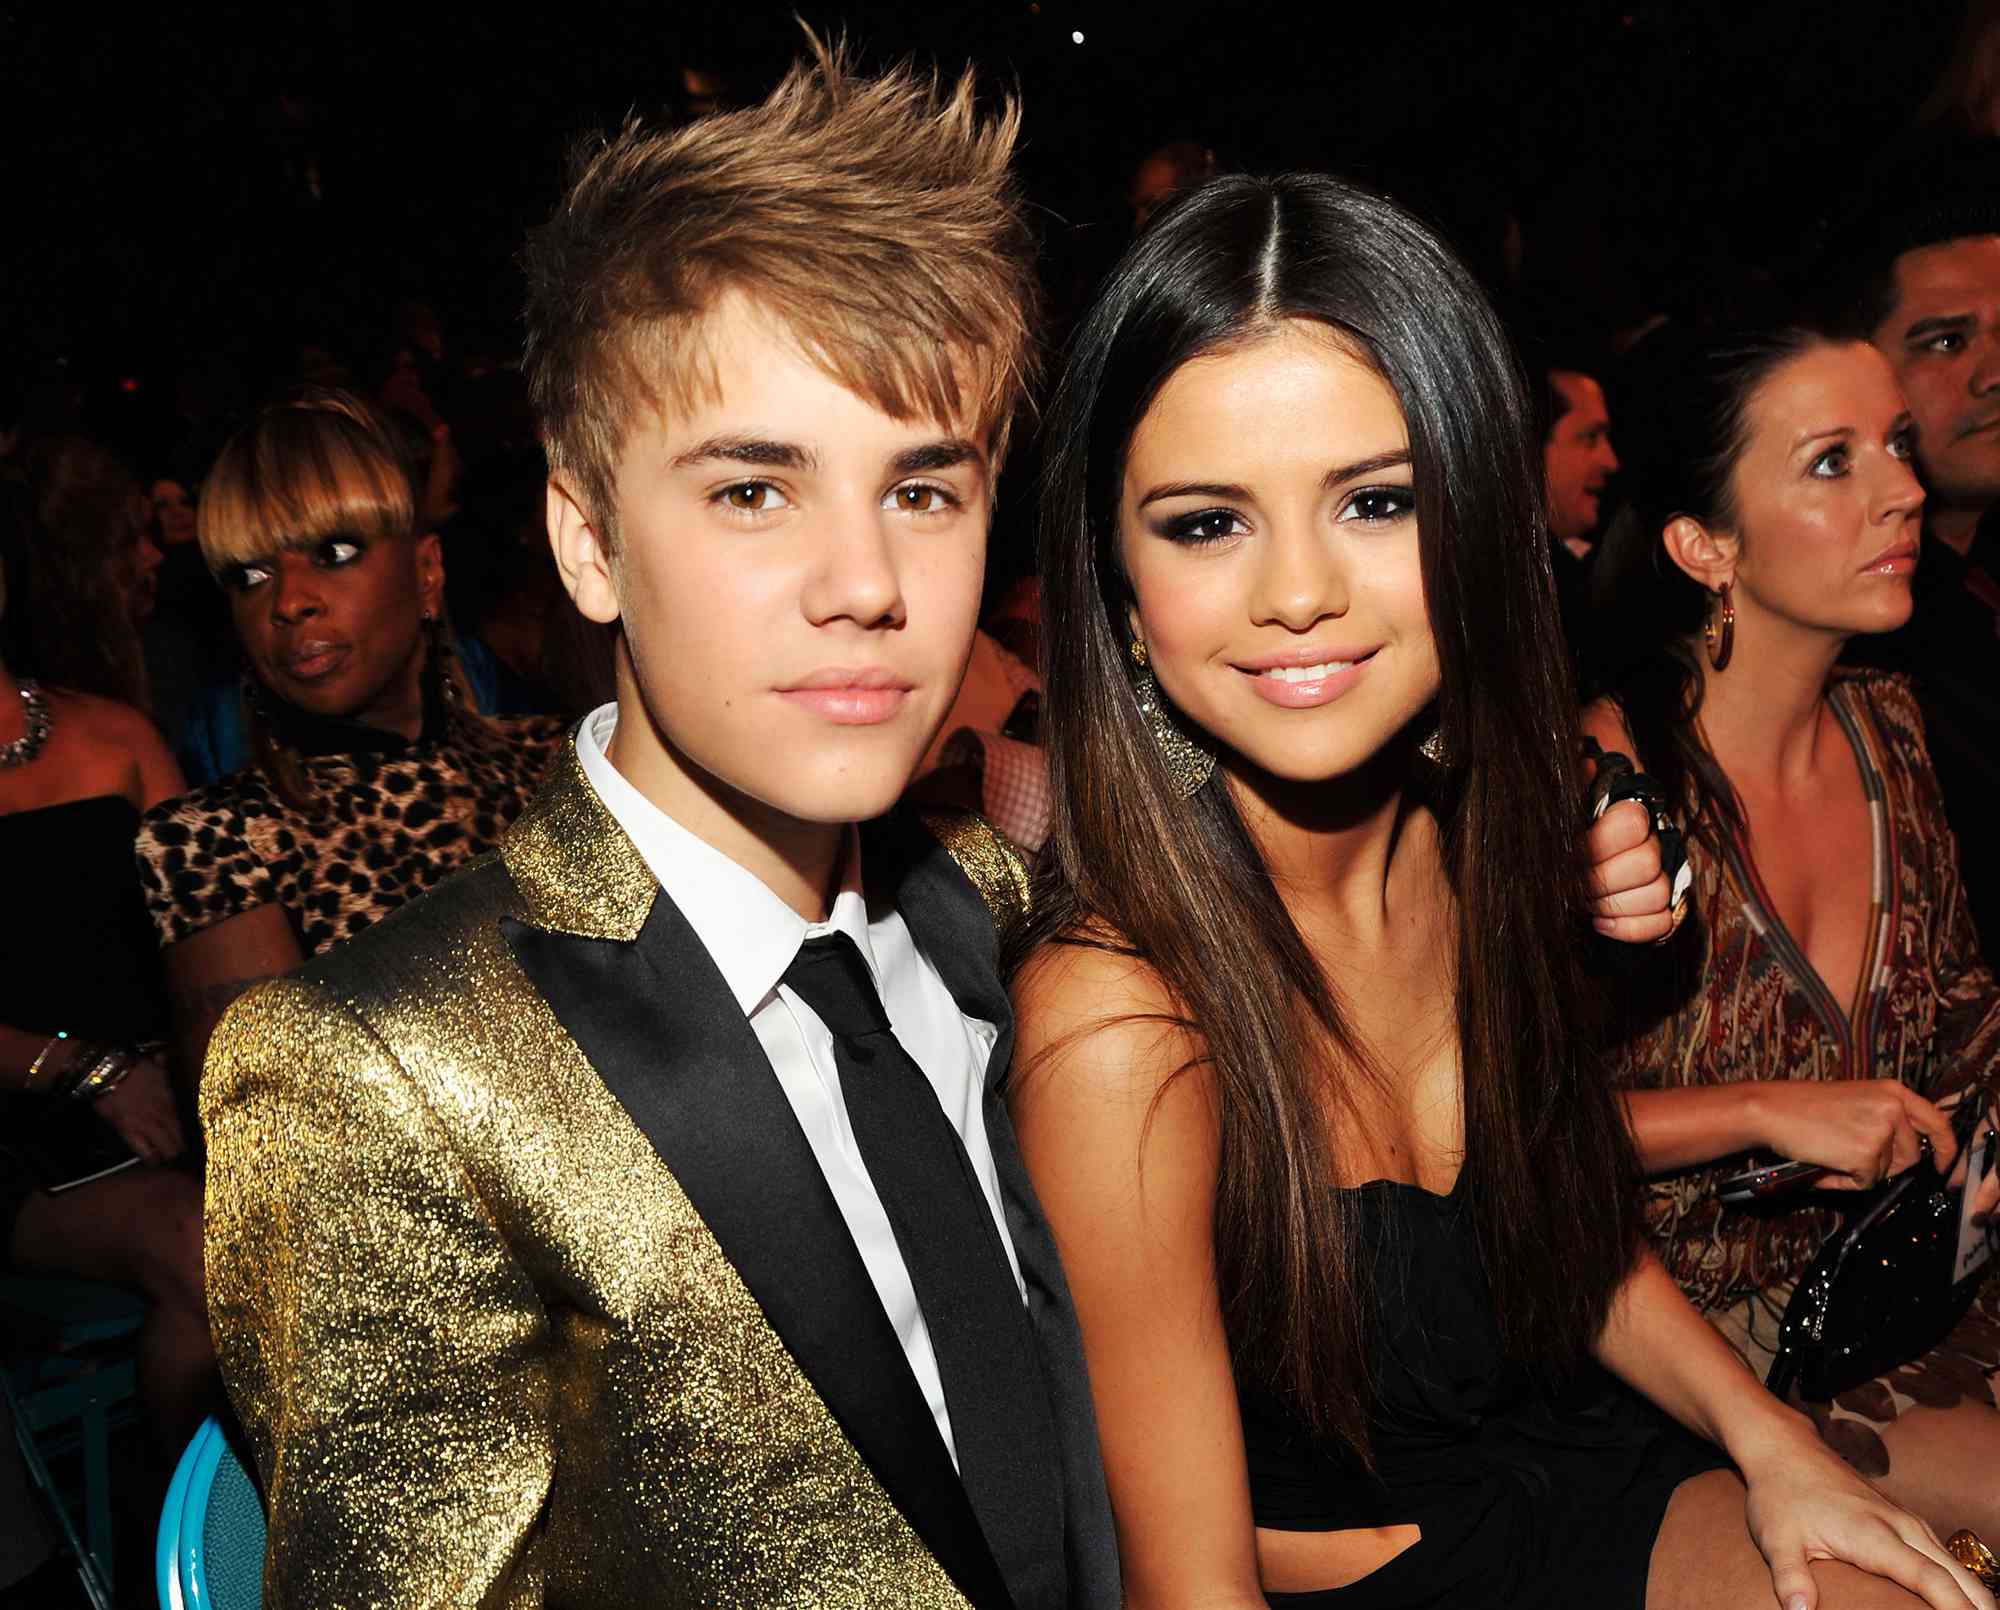 Justin Bieber (L) and Selena Gomez pose during the 2011 Billboard Music Awards at the MGM Grand Garden Arena May 22, 2011 in Las Vegas, Nevada